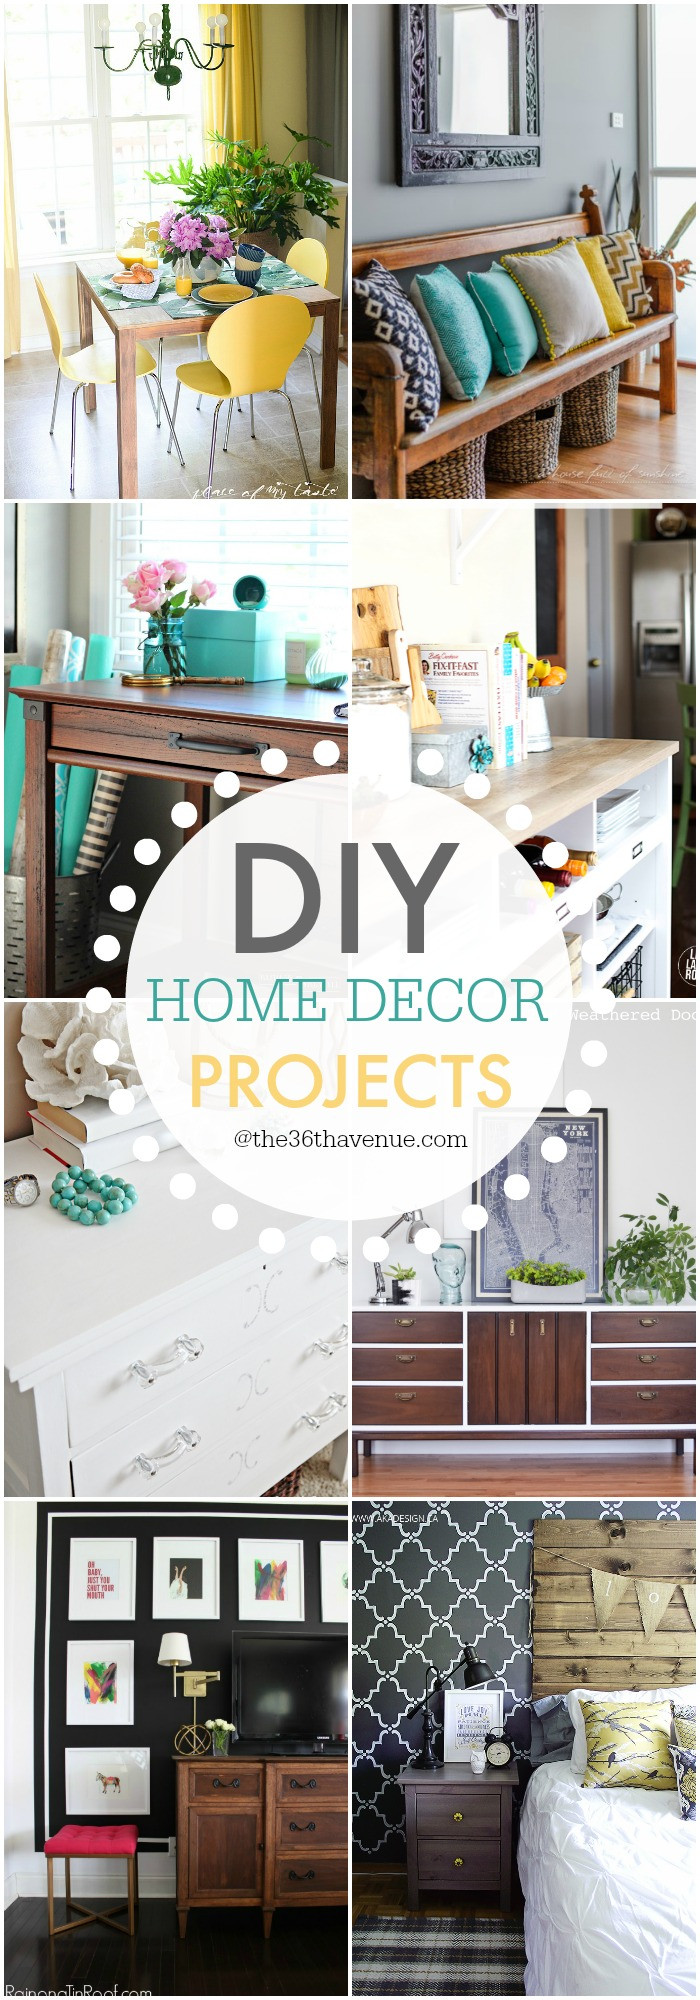 Home DIY Projects
 The 36th AVENUE DIY Home Decor Projects and Ideas